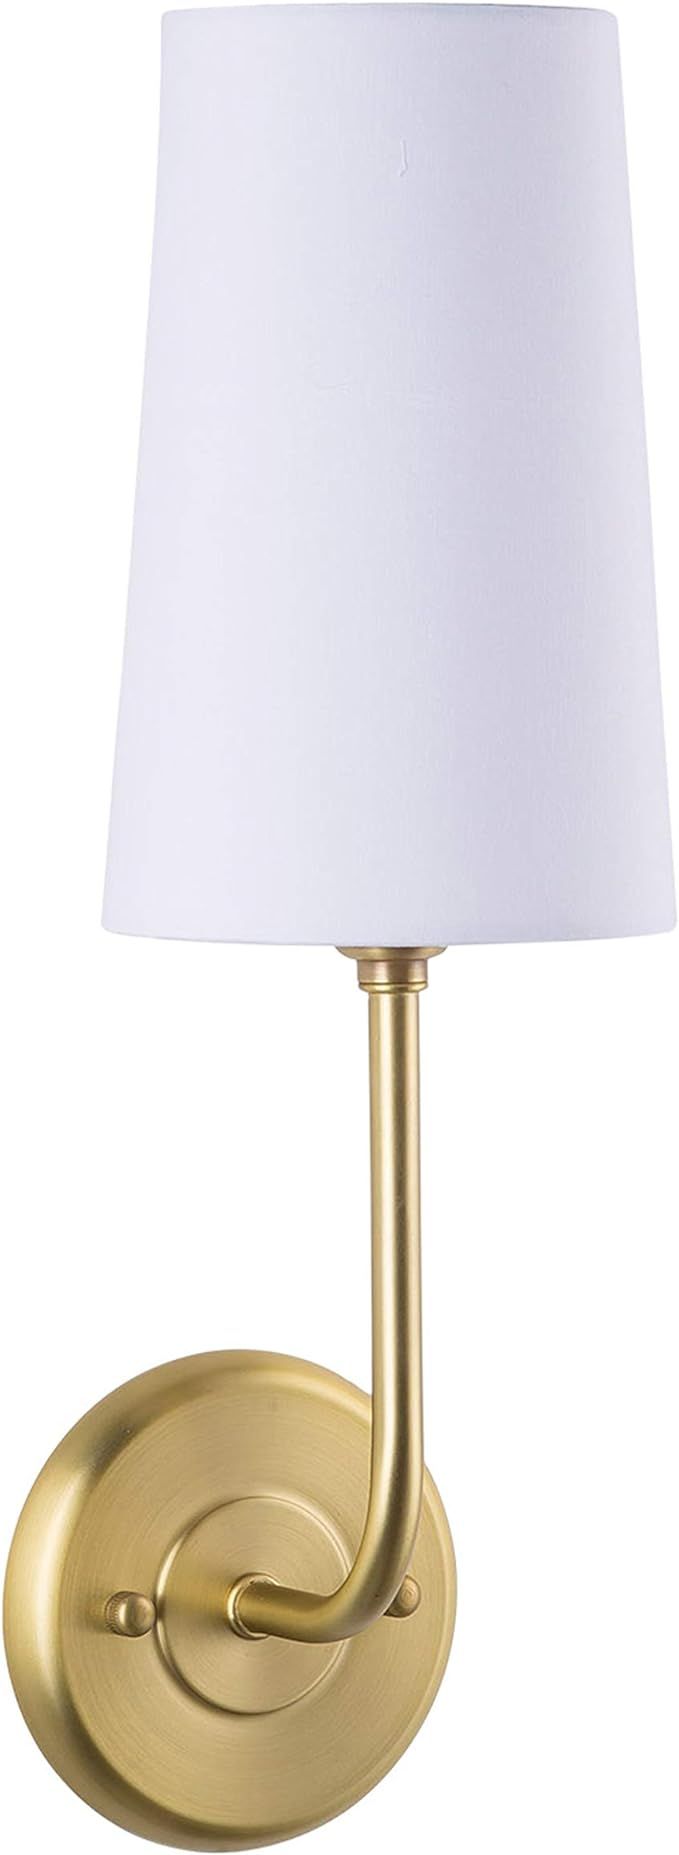 Forma Wall Sconce Light Fixture | Brushed Brass Bathroom Lighting with Fabric Shade LL-SC482-AB | Amazon (US)